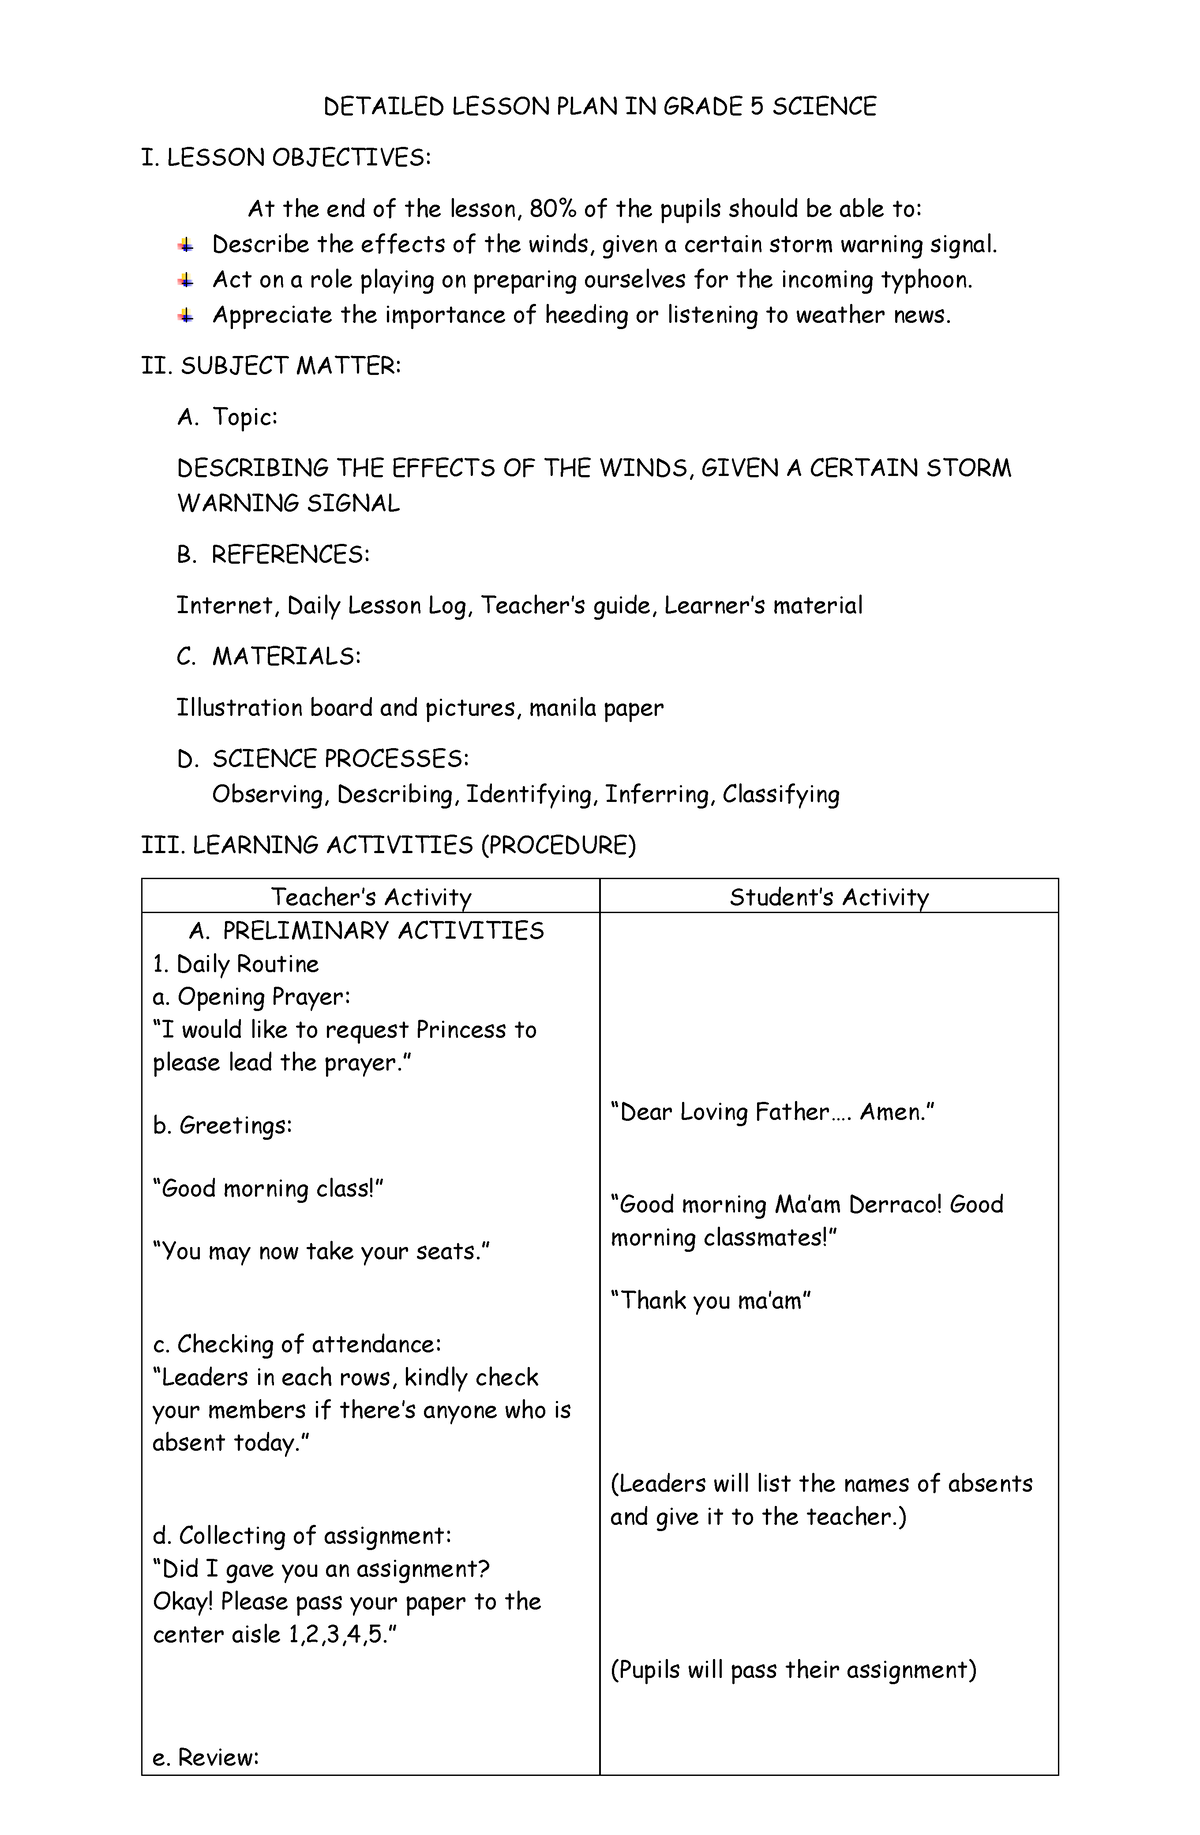 Detailed Lesson PLAN IN Grade 5 Science - DETAILED LESSON PLAN IN GRADE ...